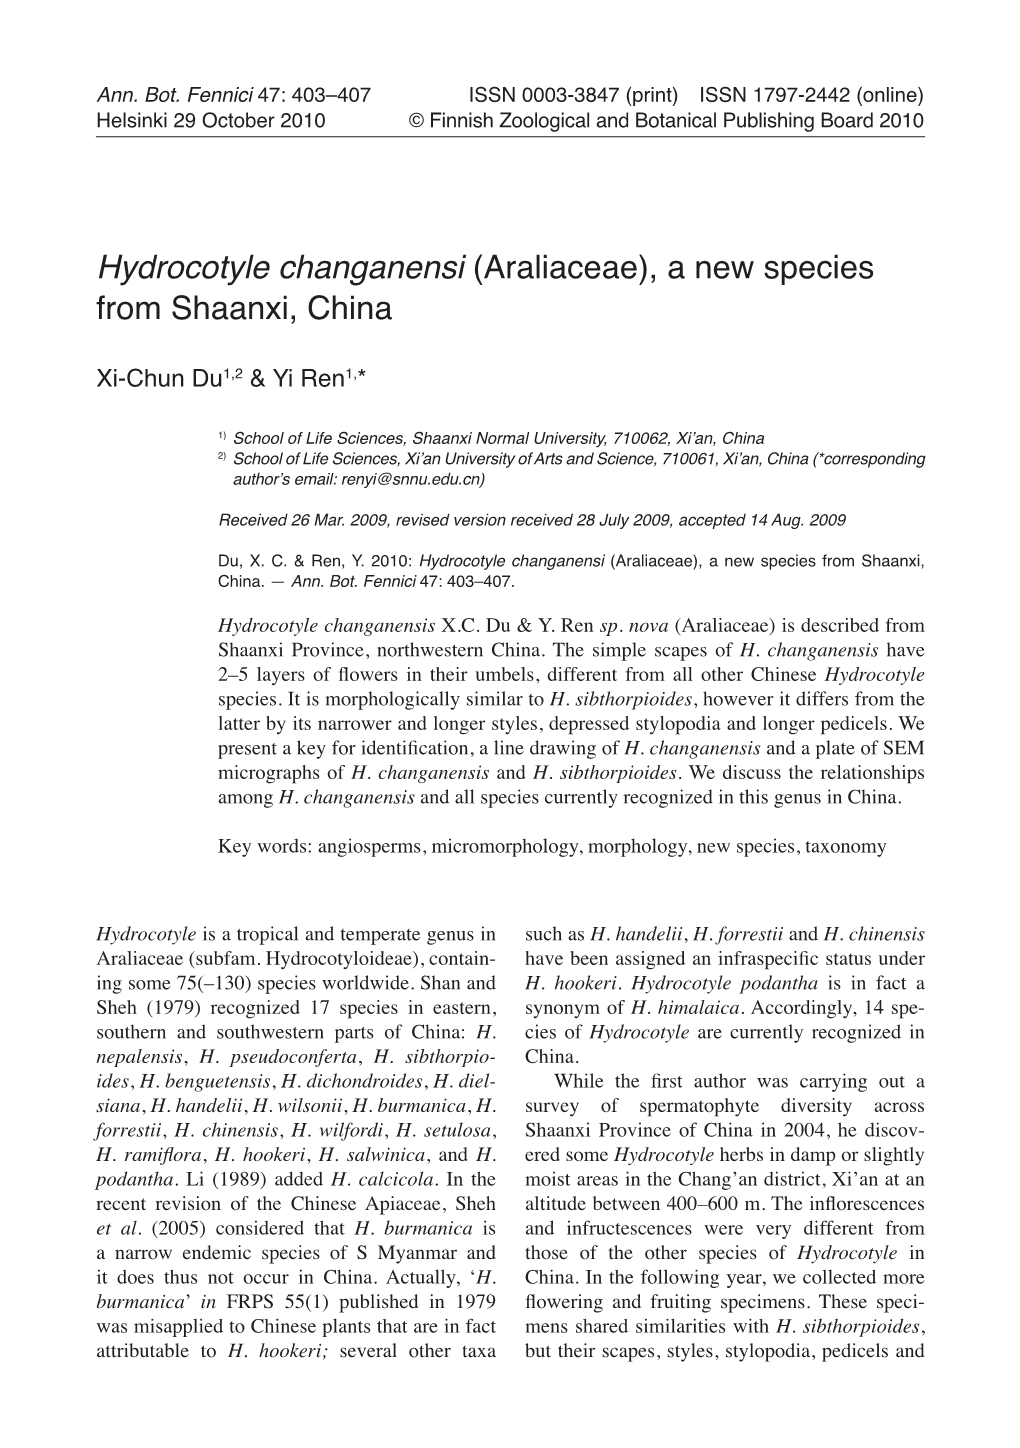 Hydrocotyle Changanensi (Araliaceae), a New Species from Shaanxi, China